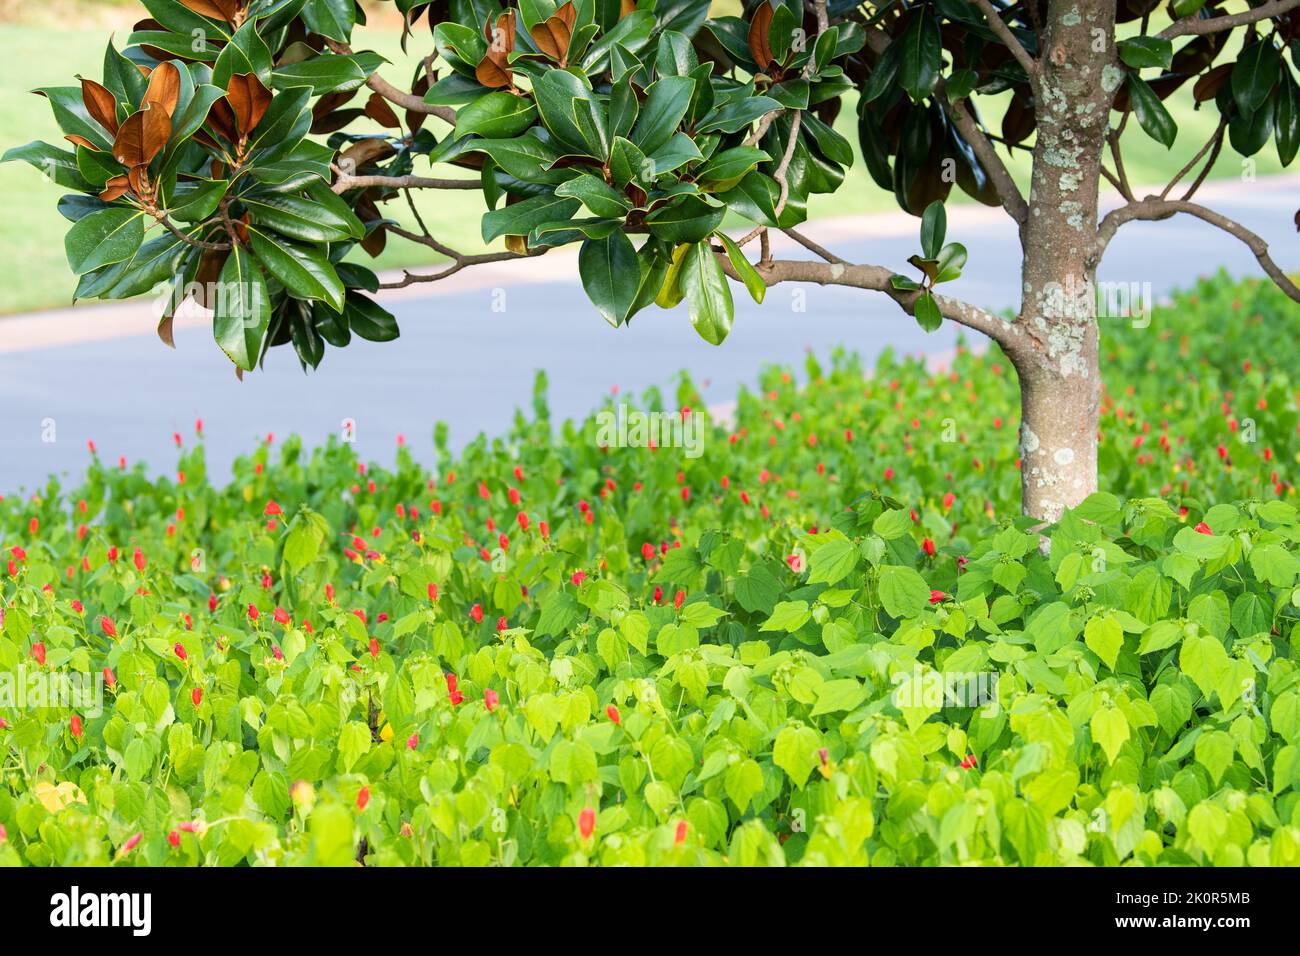 A flower bed filled with red flowering malvaviscus arboreus and a magnolia grandiflora tree. Stock Photo